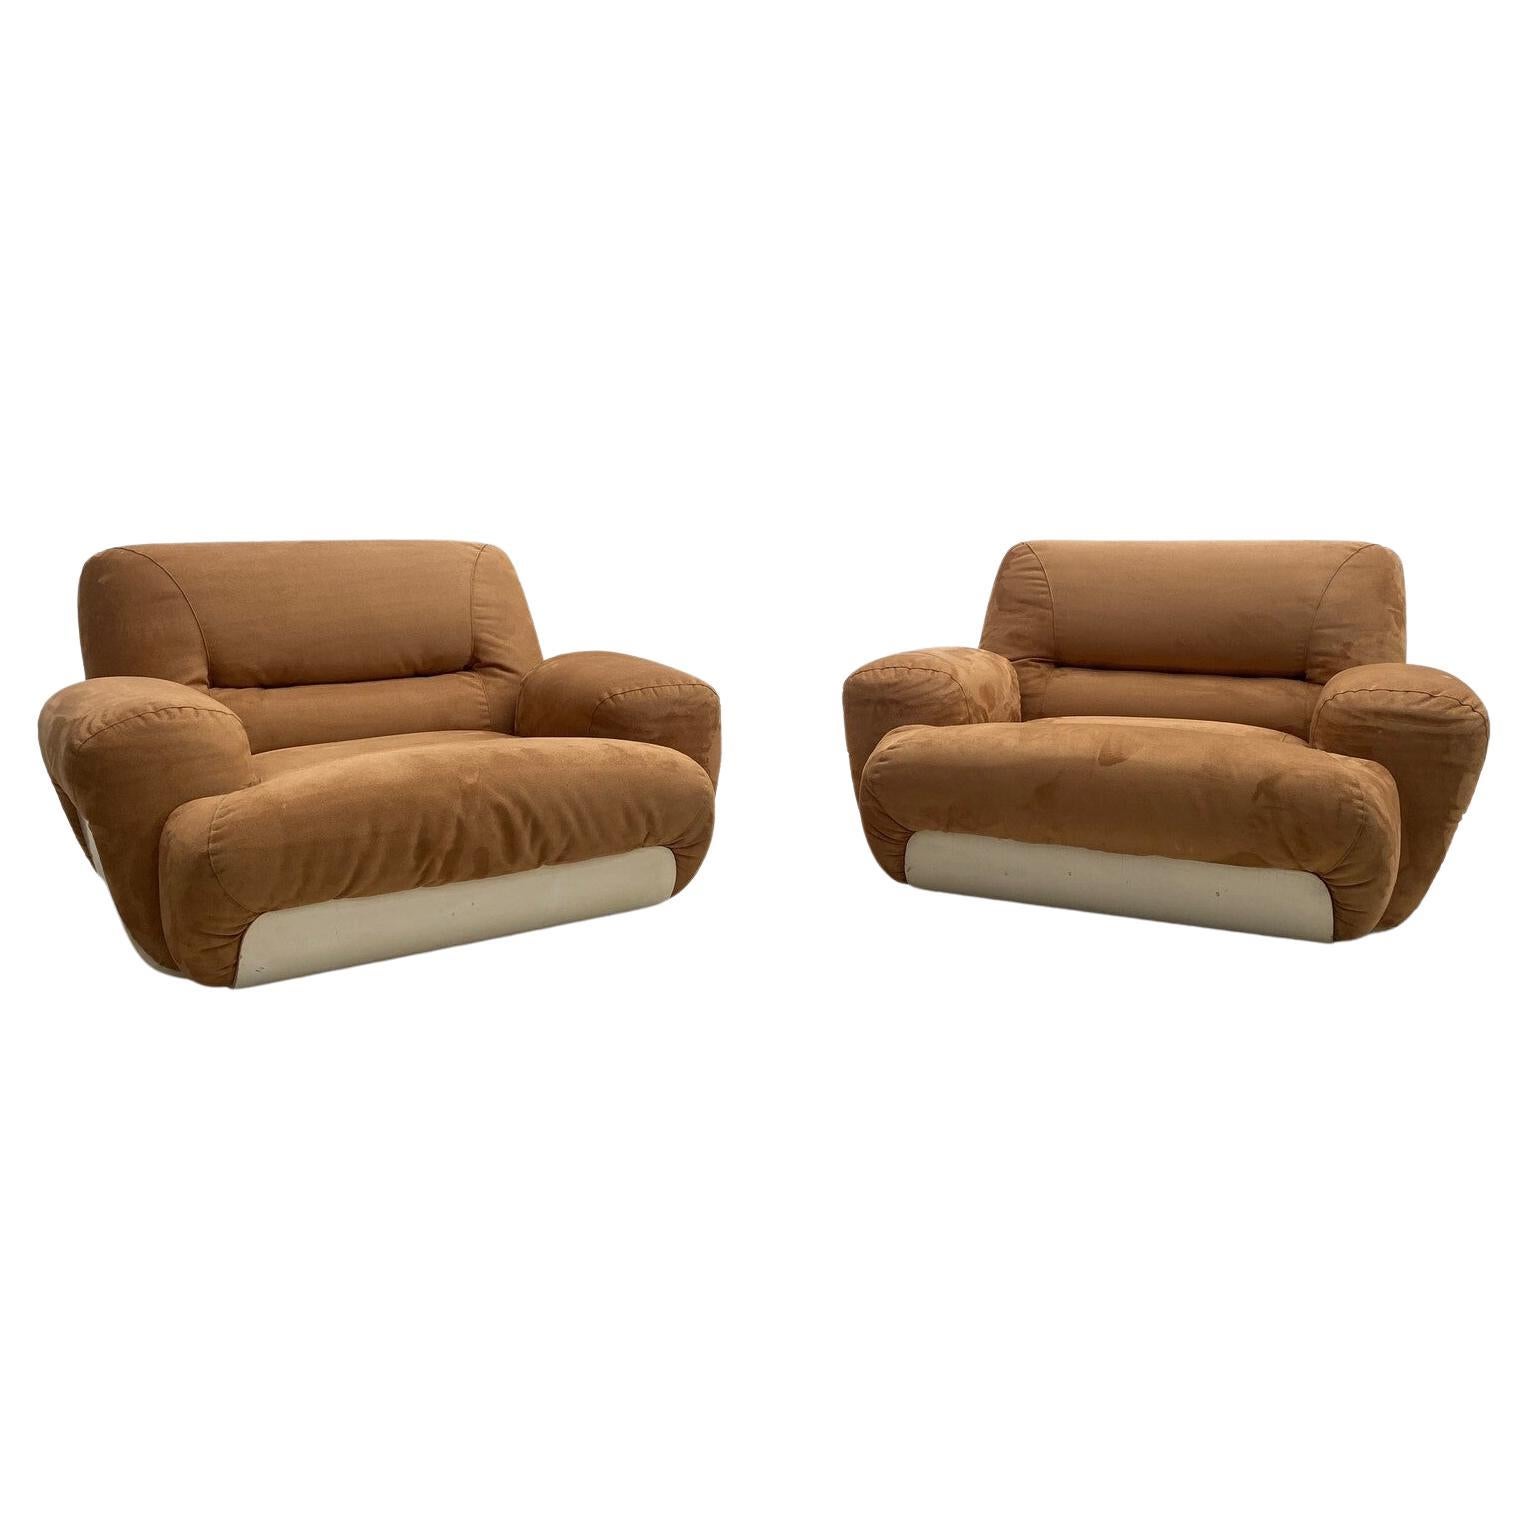 Pair of Mid-Century Modern Nubuck Leather Lounge Chairs, Italy, 1970s For Sale